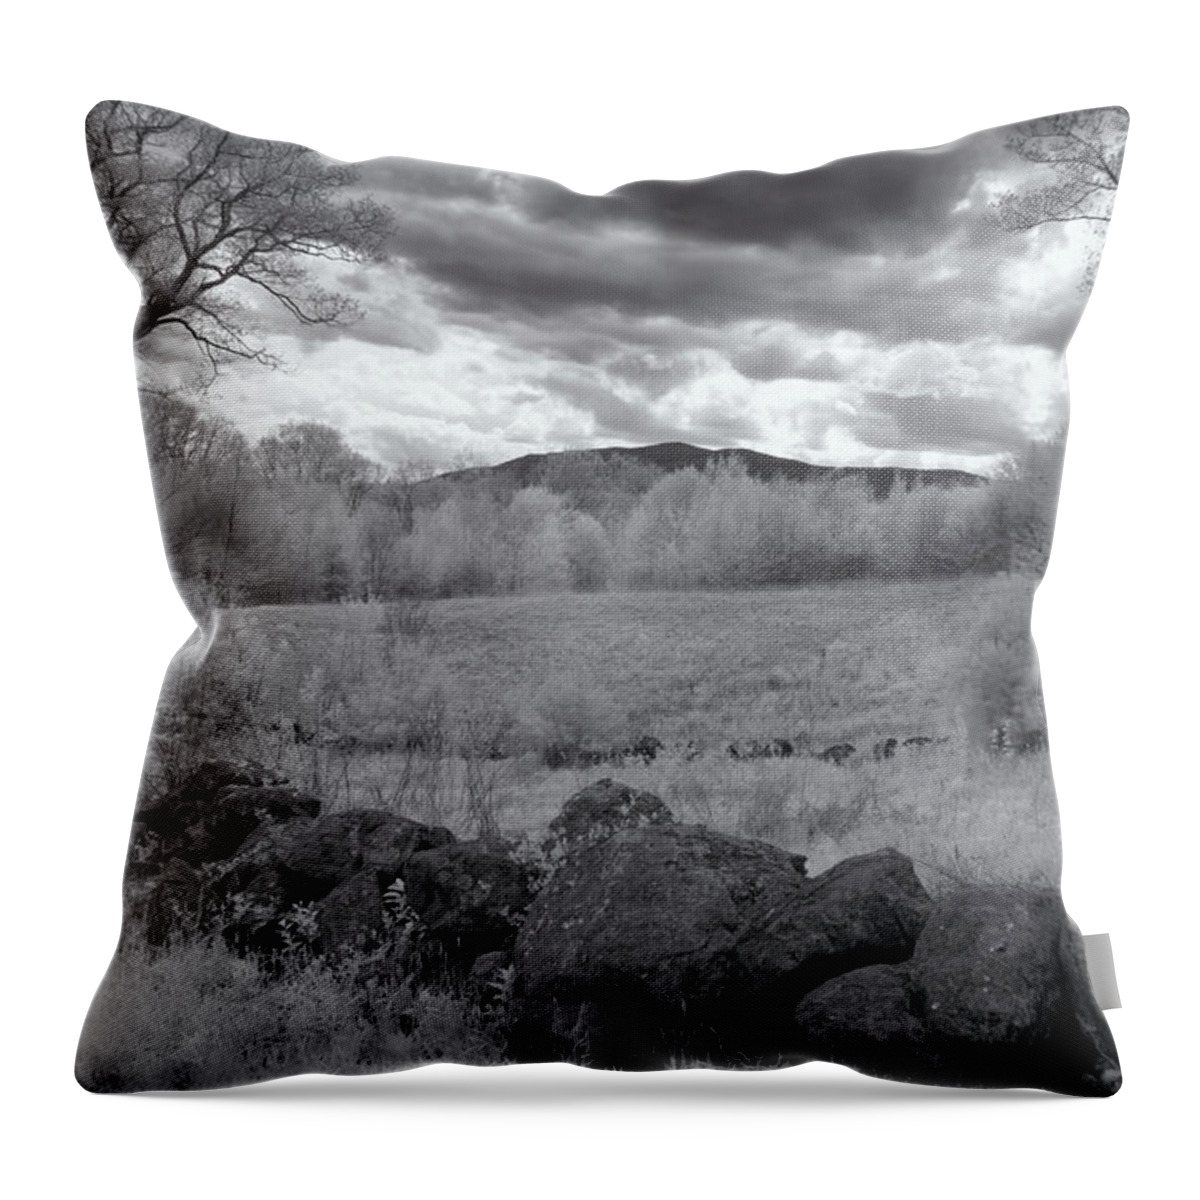 Dublin New Hampshire Throw Pillow featuring the photograph Monadnock In Black And White by Tom Singleton